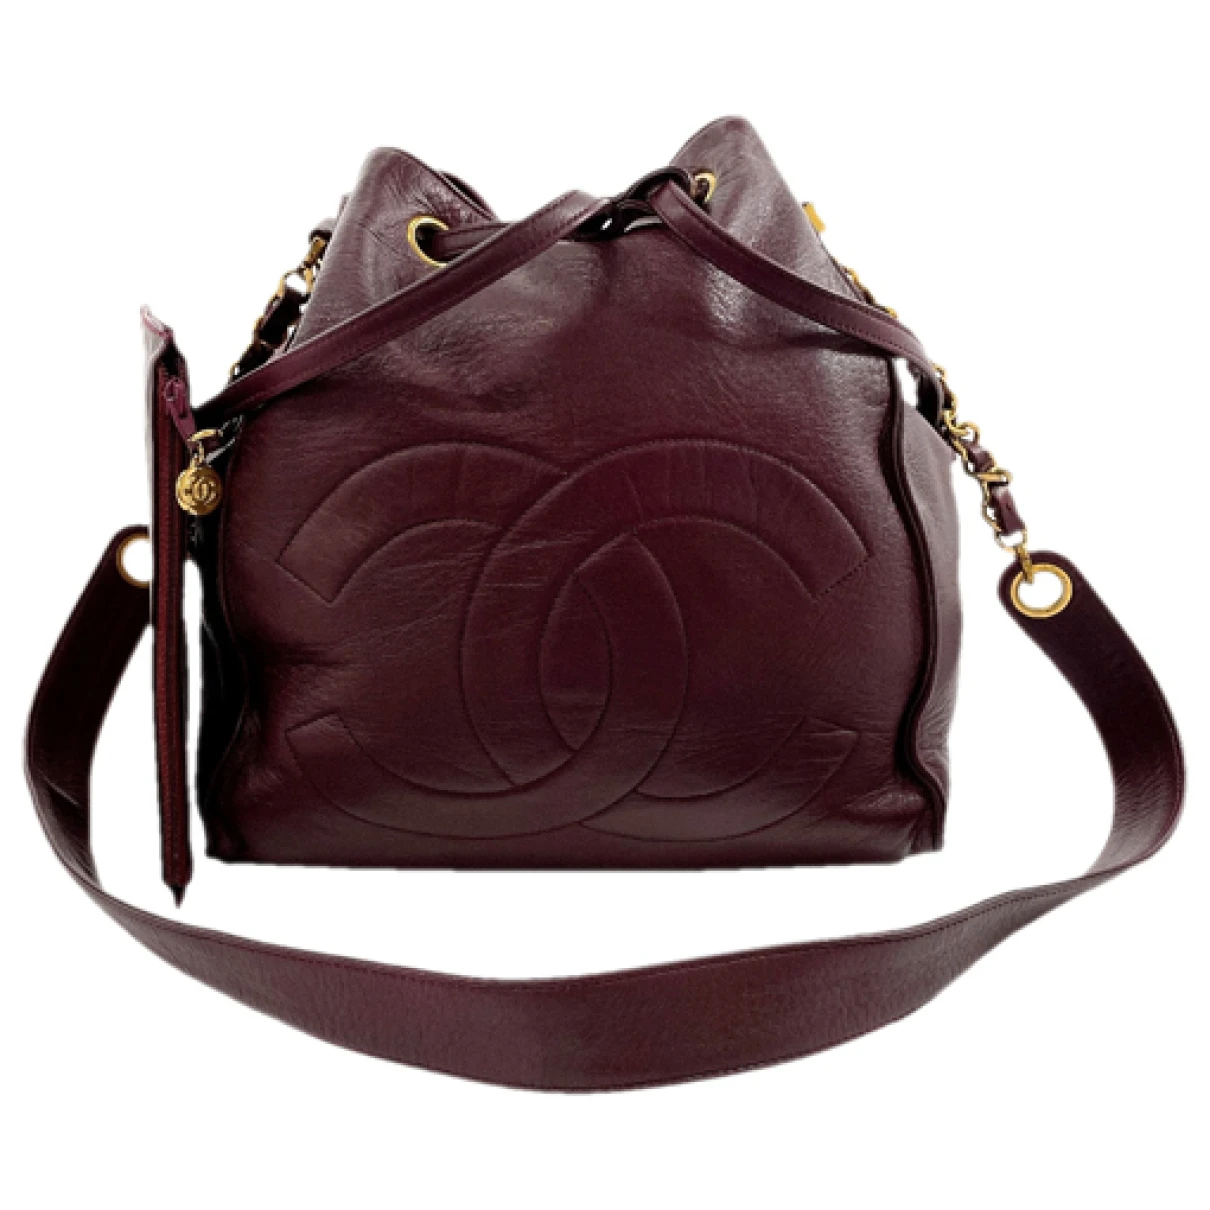 Pre-owned Chanel Leather Handbag In Burgundy